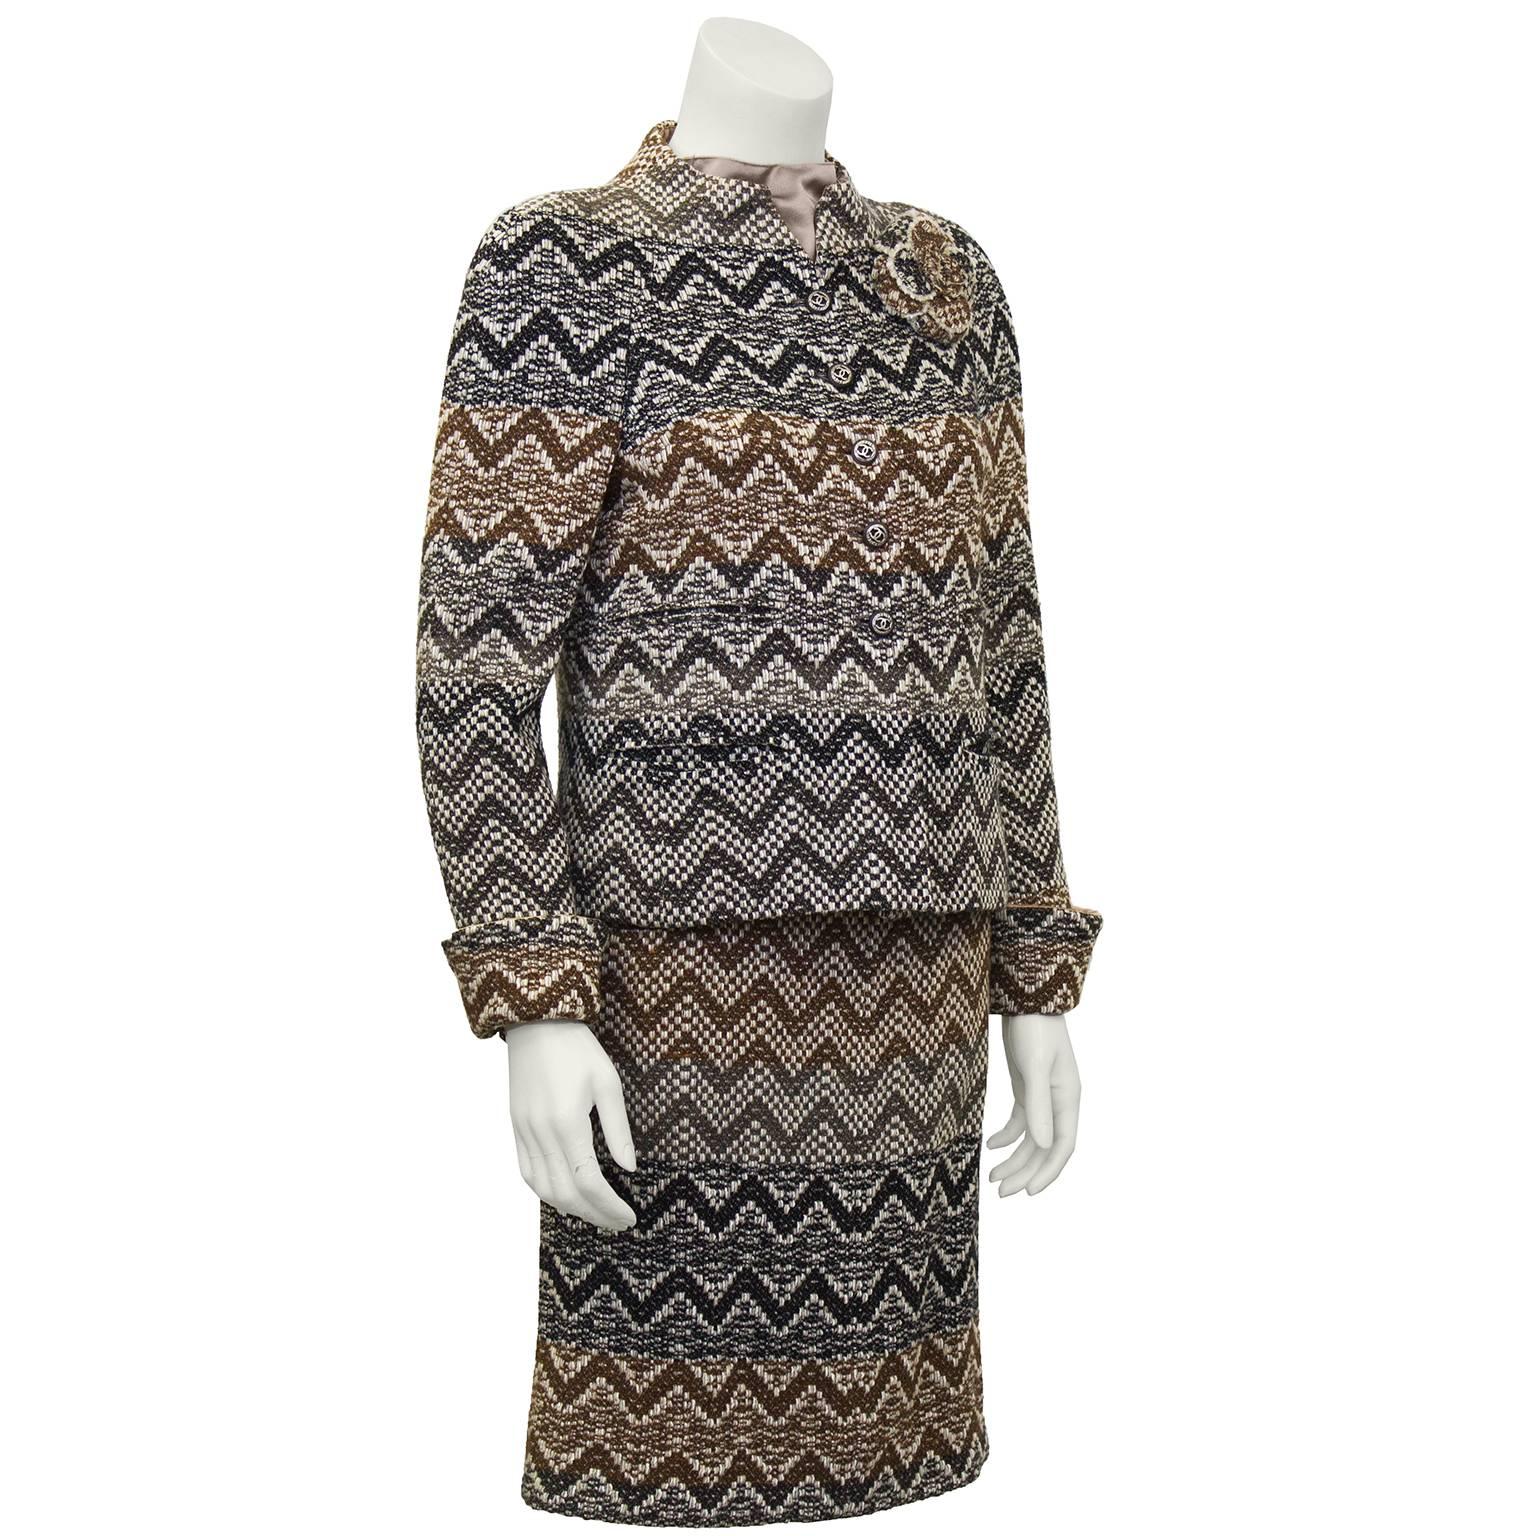 Chanel F/W 05 gray taupe and cream chevron pattern boucle skirt and jacket with matching taupe satin sleeveless shell. Detachable matching signature 'Camilla' flower pin at bust. Excellent Condition. Fits like US size 4.

Jacket: Sleeve 16